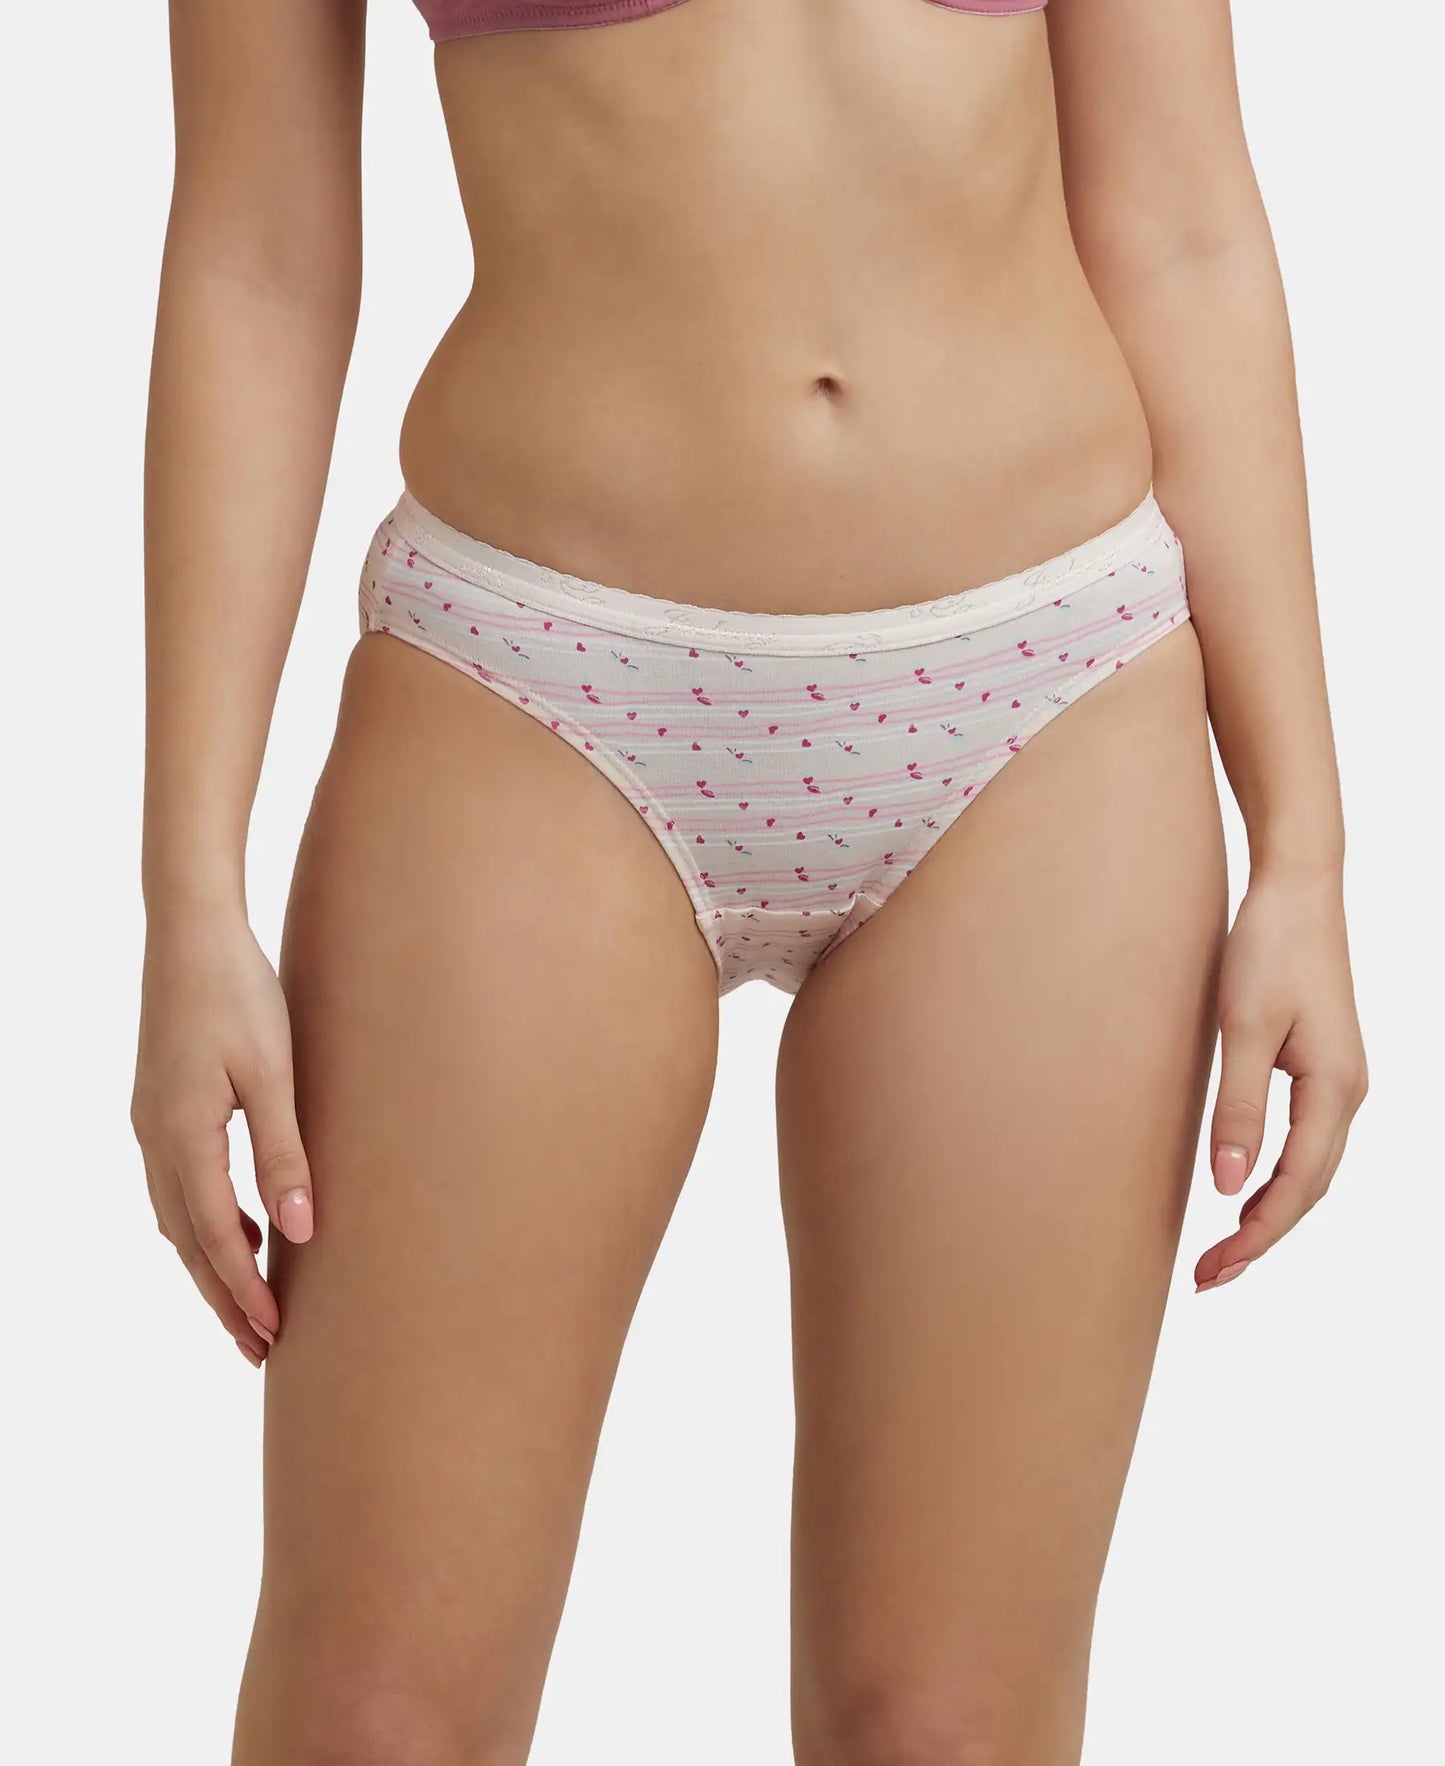 Medium Coverage Super Combed Cotton Bikini With Exposed Waistband and StayFresh Treatment - Light Prints-3